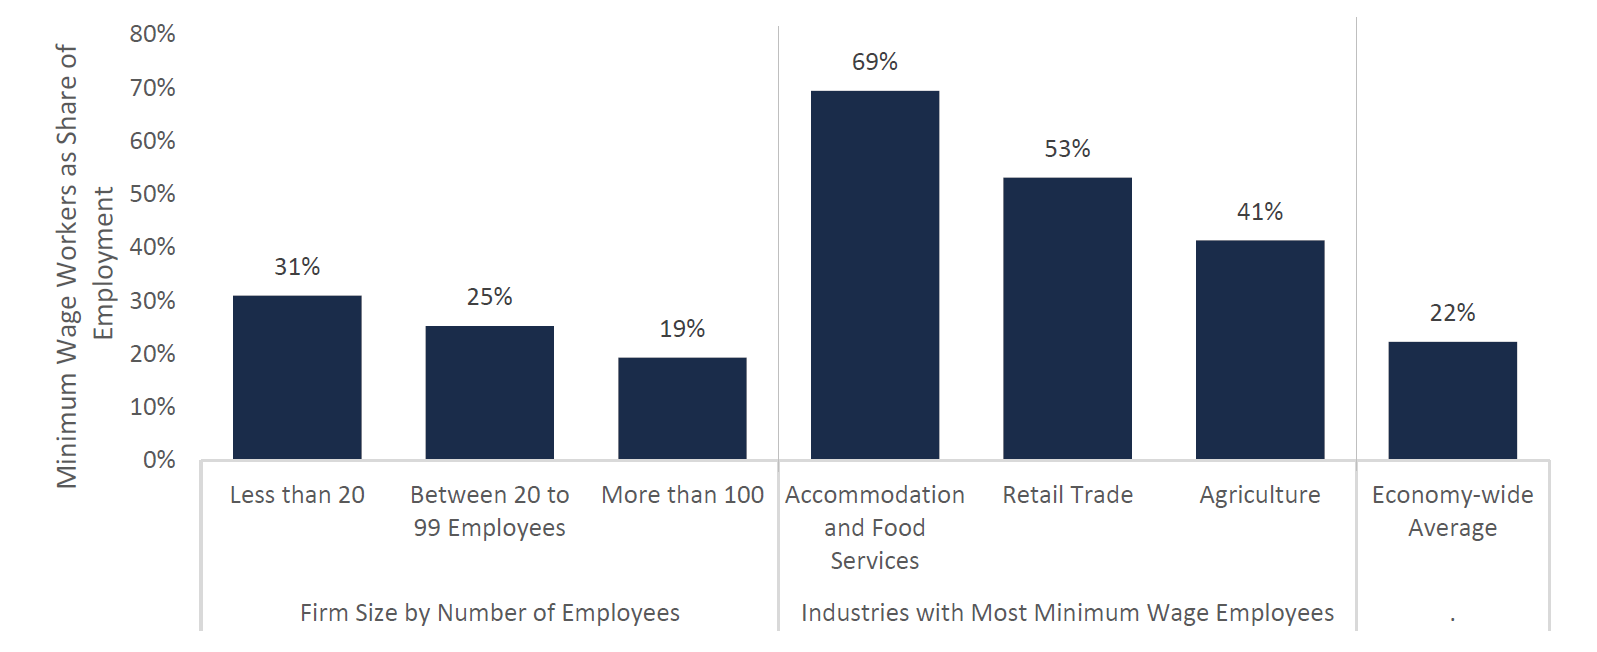 Minimum Wage Workers ($15 per hour) as Share of Total Employment by Firm Size and Industry